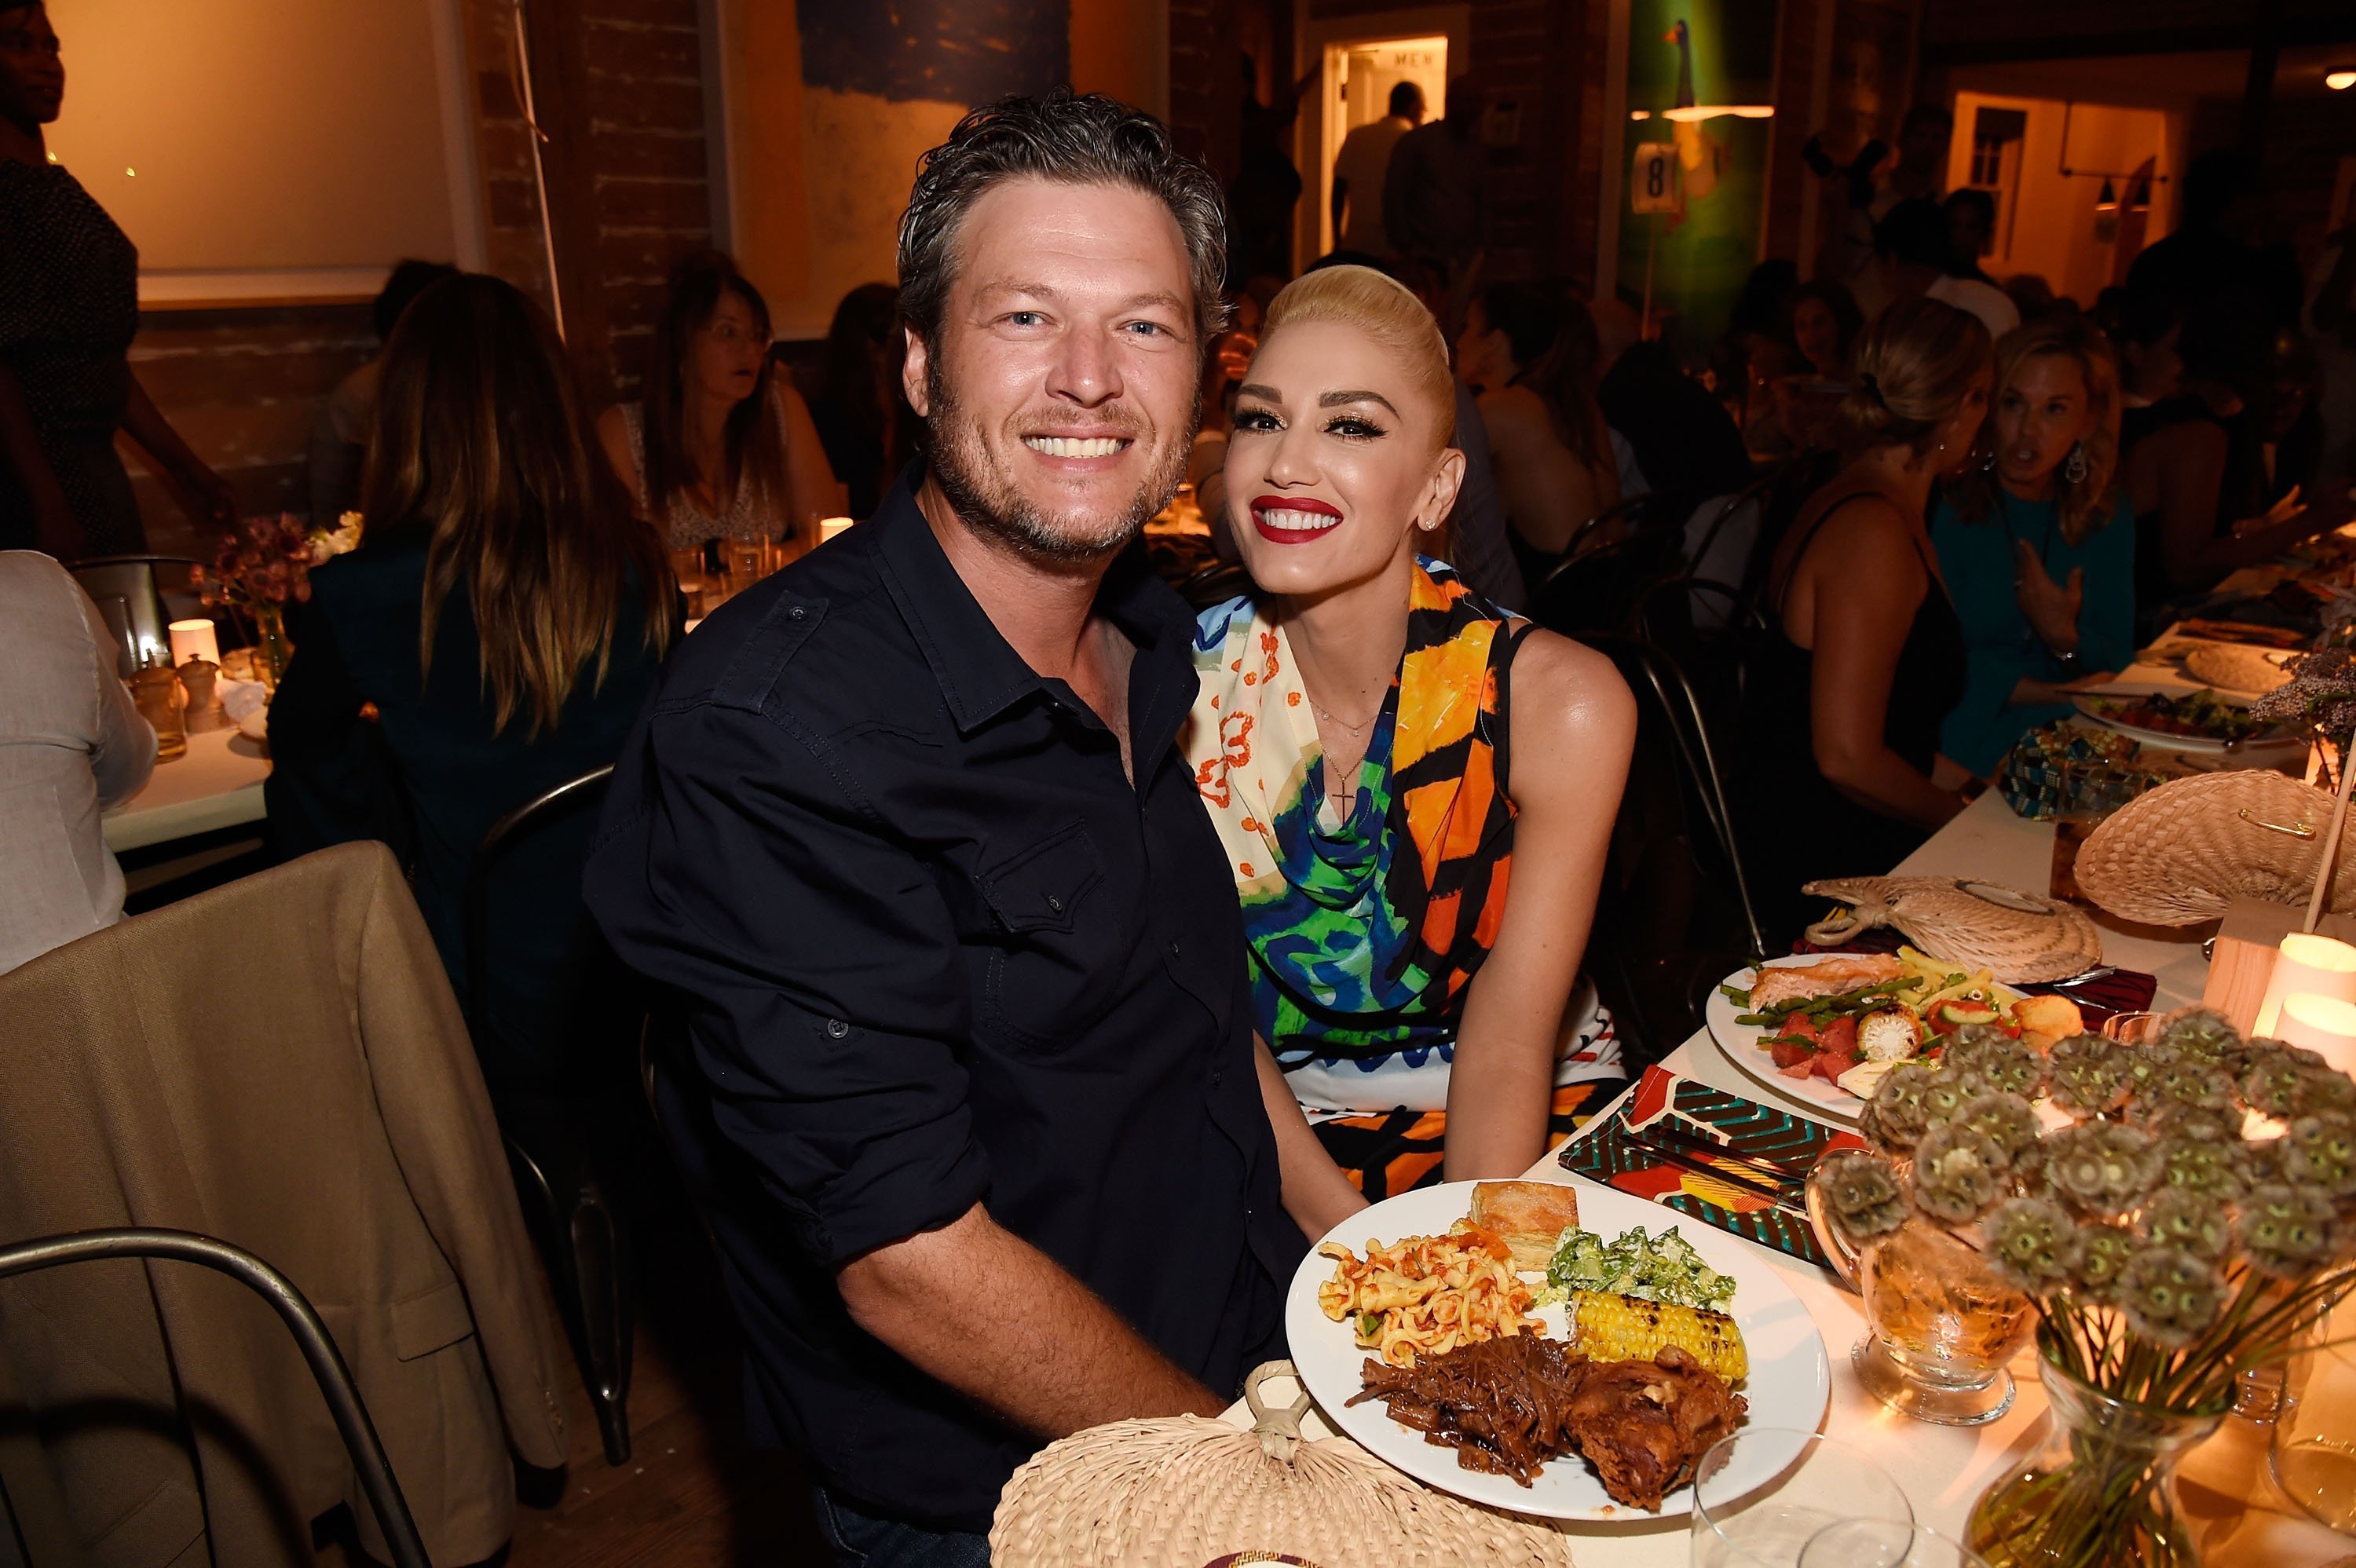 Blake Shelton and Gwen Stefani attend Apollo in the Hamptons in New York on August 20, 2016 | Photo: Getty Images